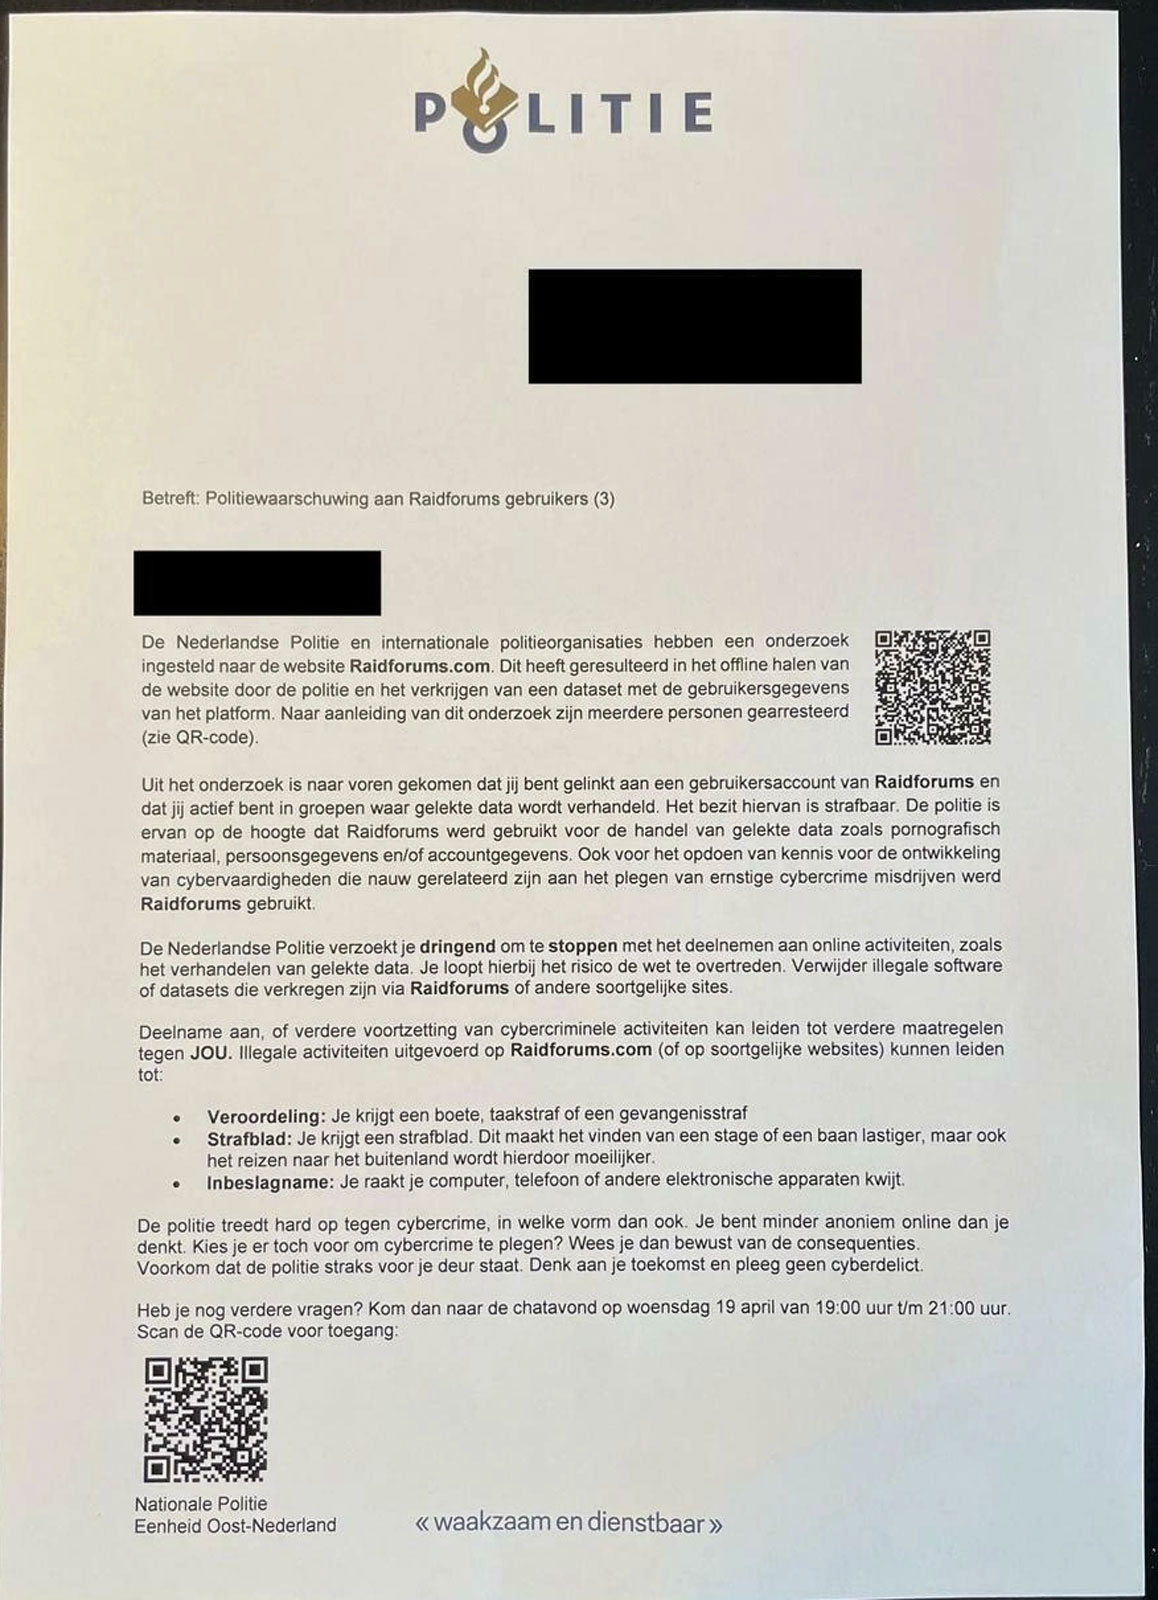 Email sent to RaidForums members by the Dutch police